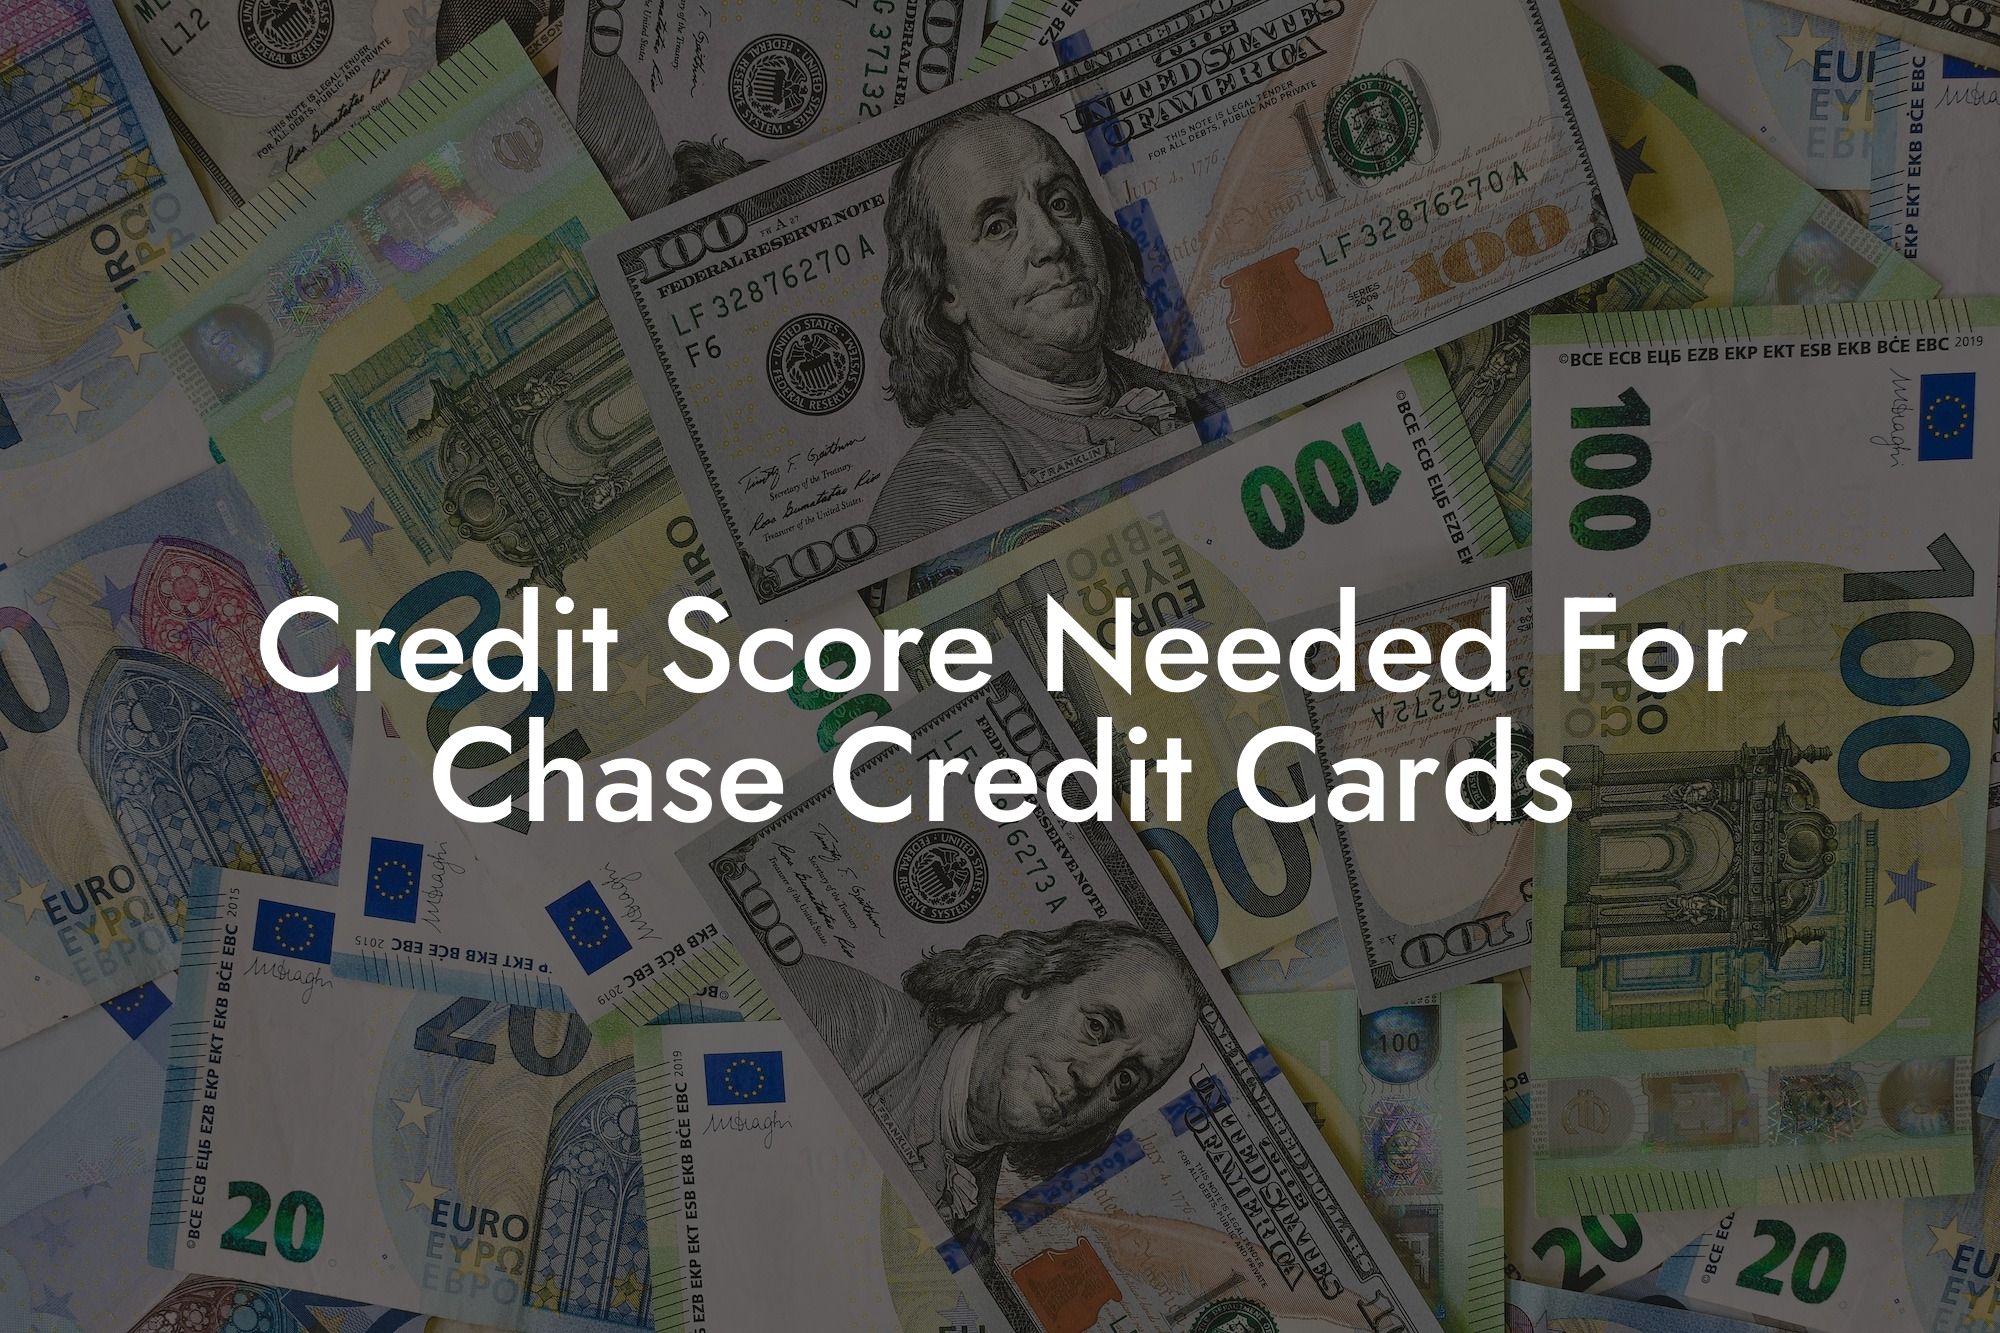 Credit Score Needed For Chase Credit Cards